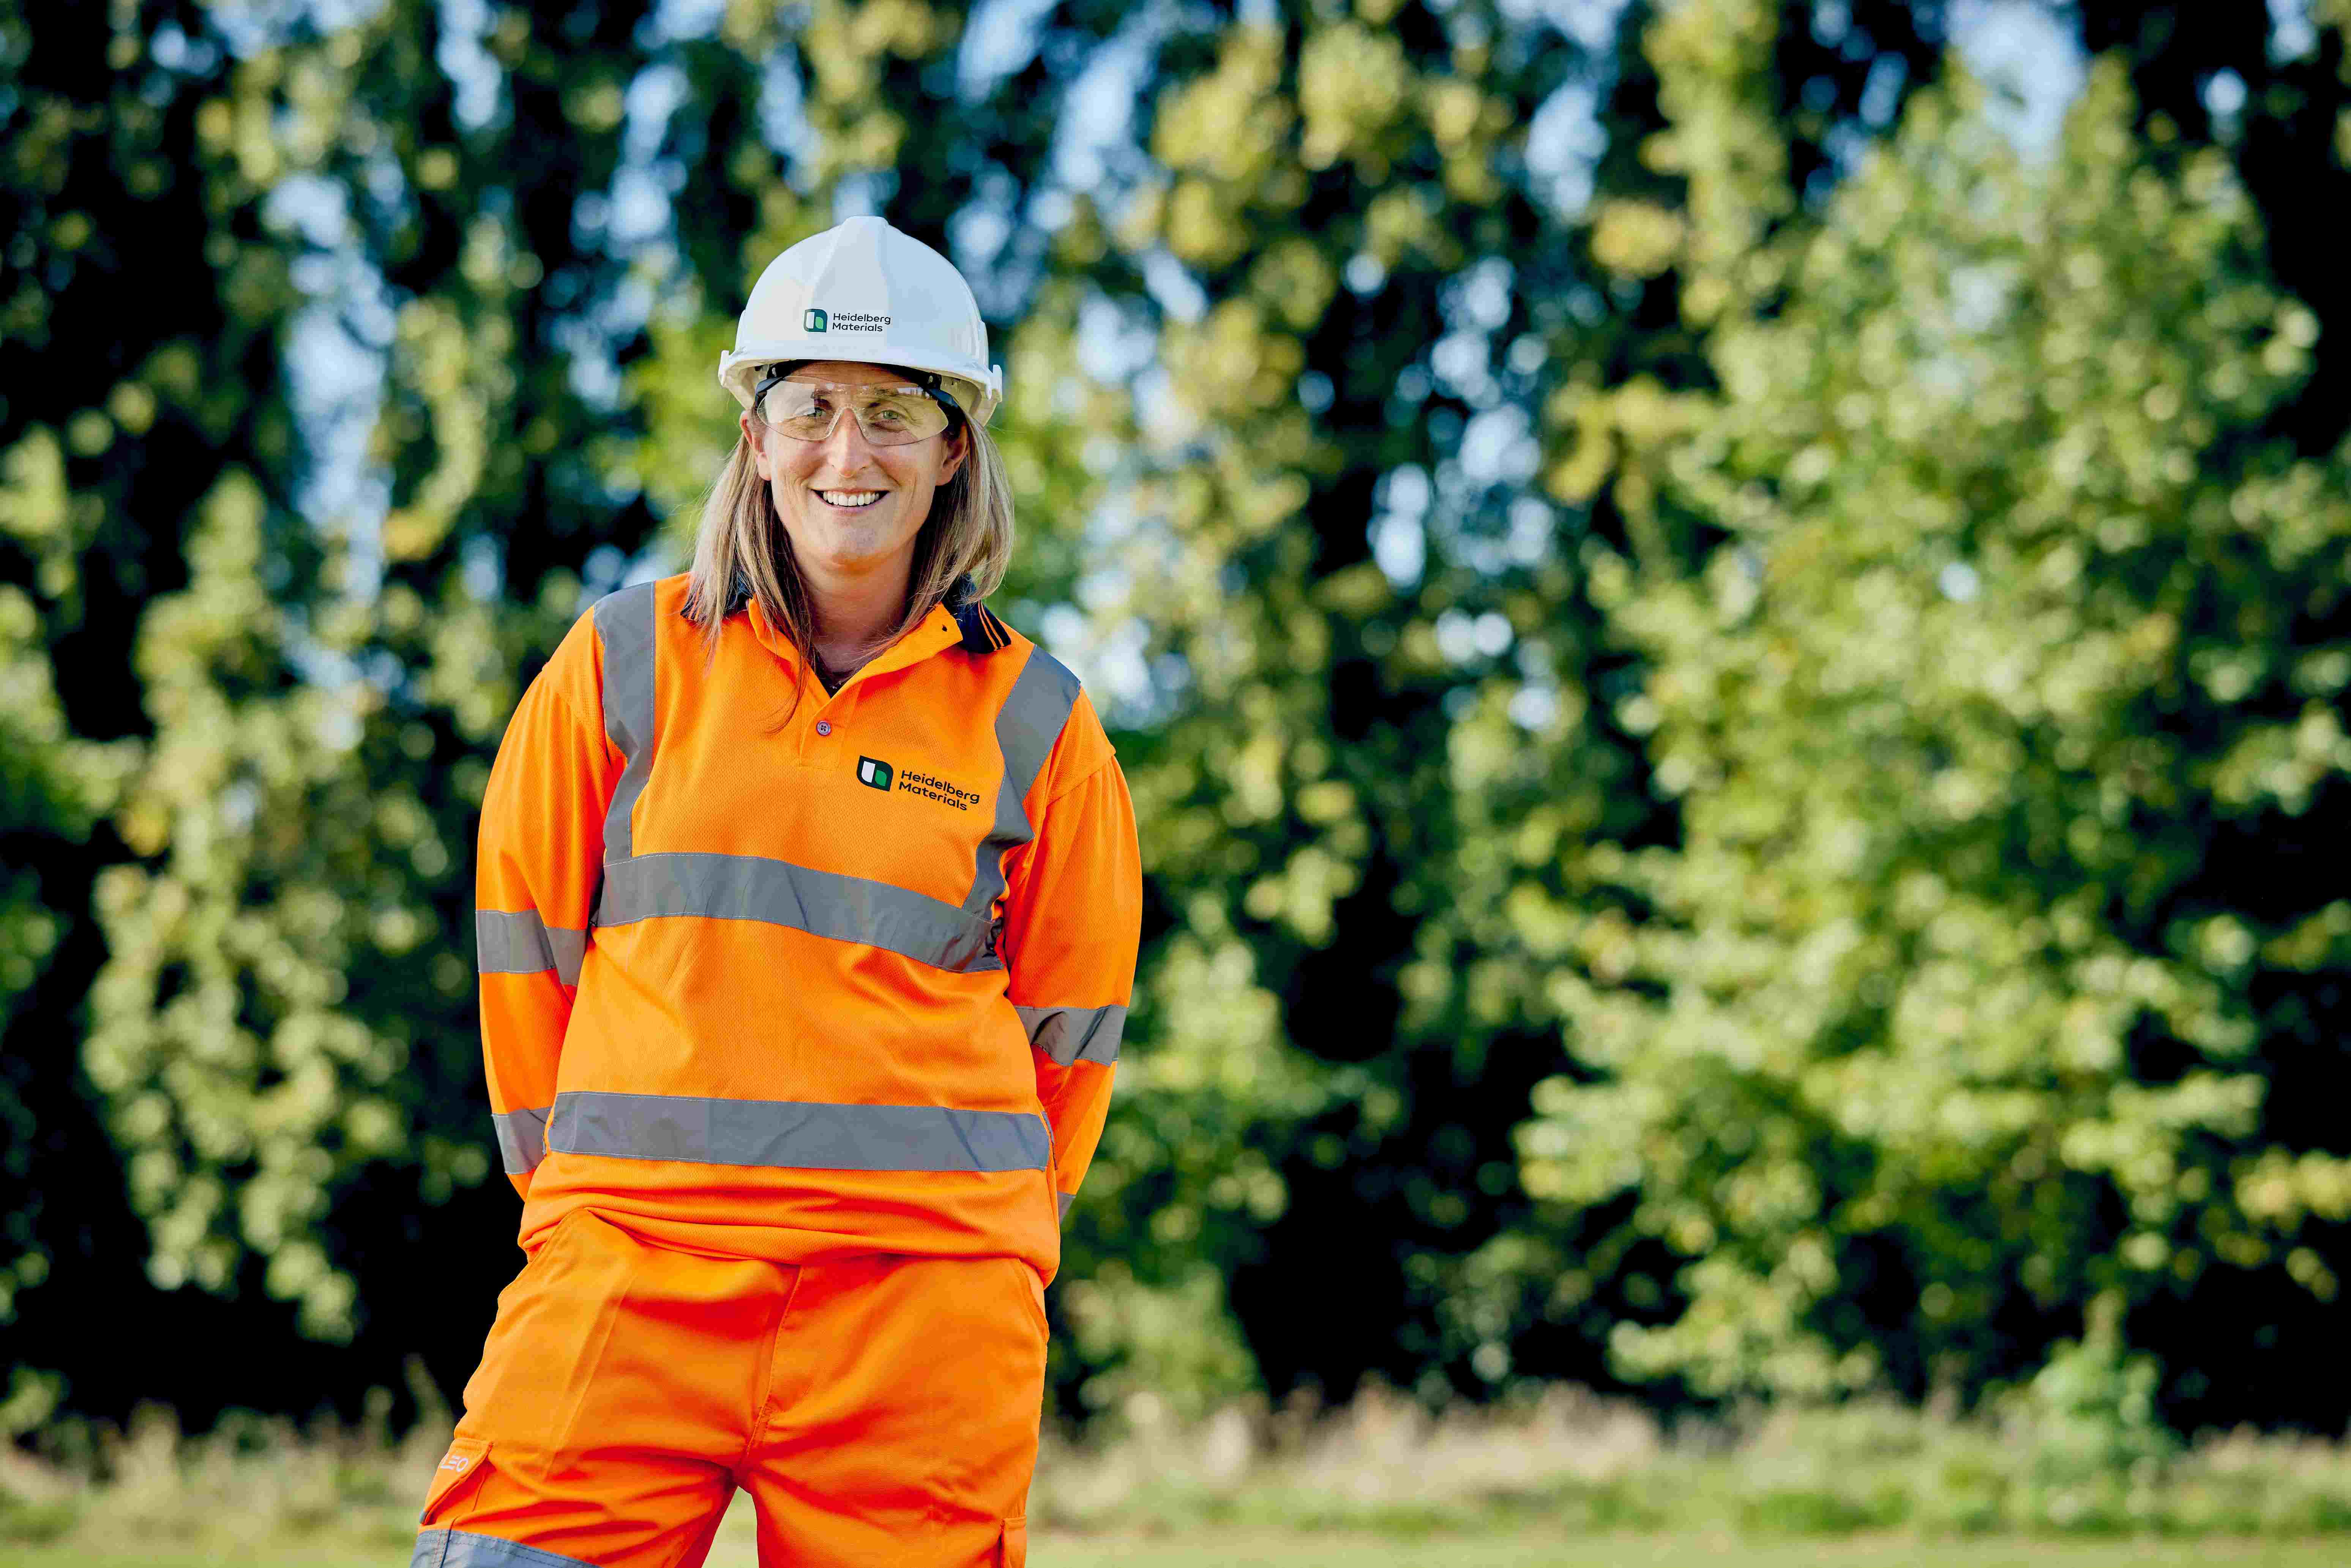 Heidelberg Materials UK sustainability director Marian Garfield says the UK’s built environment is responsible for around a quarter of all the country's greenhouse gas emissions